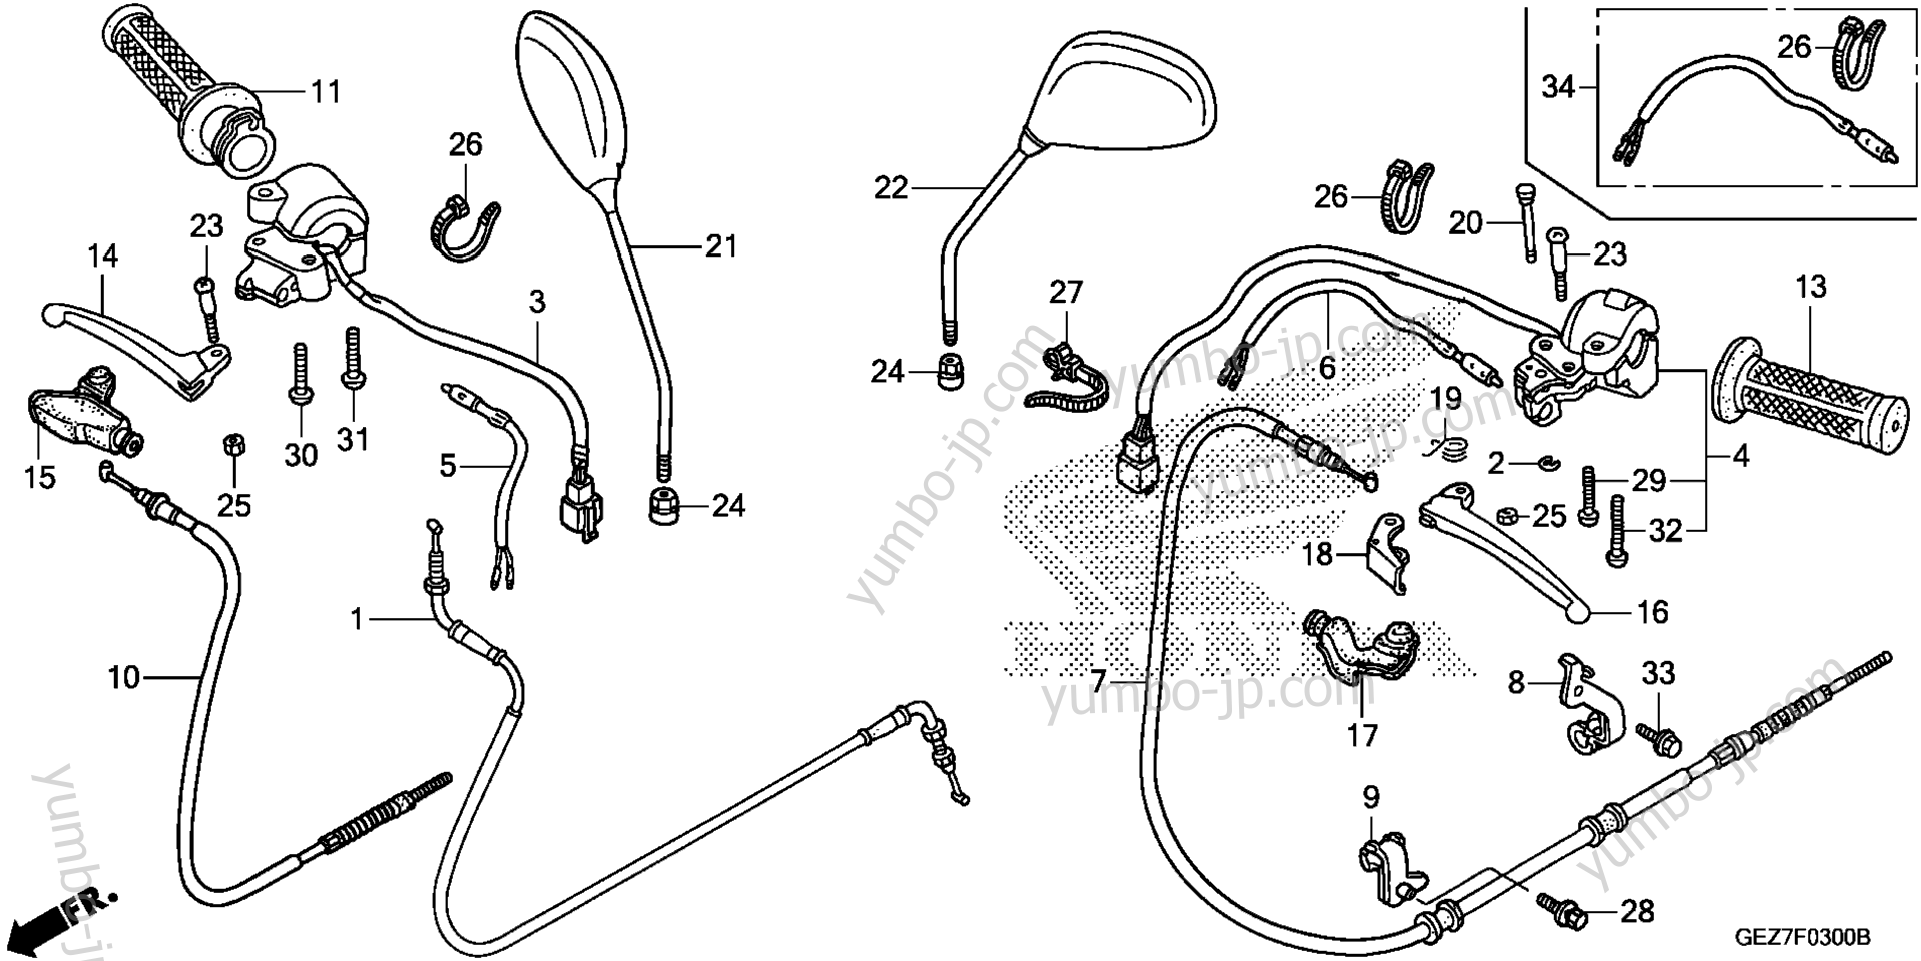 HANDLE LEVER / SWITCH / CABLE for scooters HONDA NPS50S A 2007 year